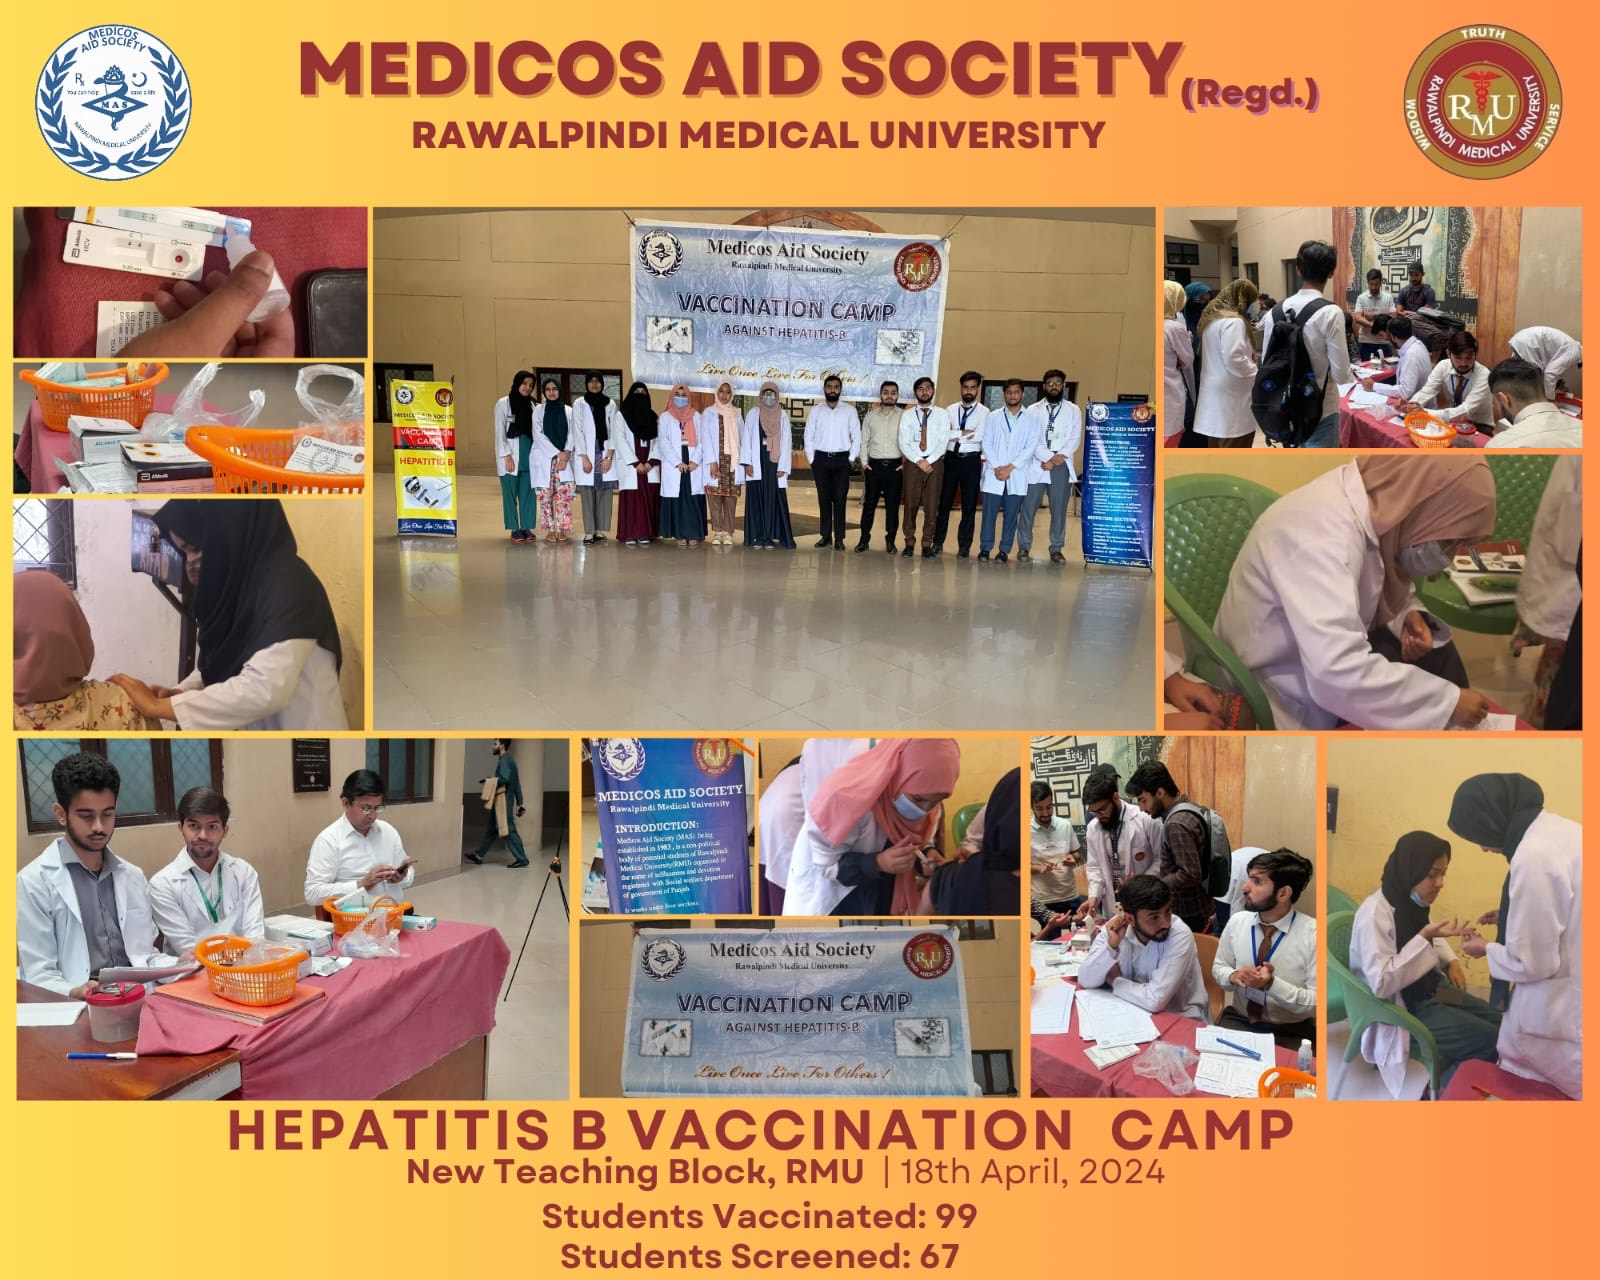 Medicos Aid Society has organized a vaccination & screening camp against Hepatitis B on, 18th April 2024 at New Teaching Block, RMU and vaccinated 99 students and screened 67 students successfully.